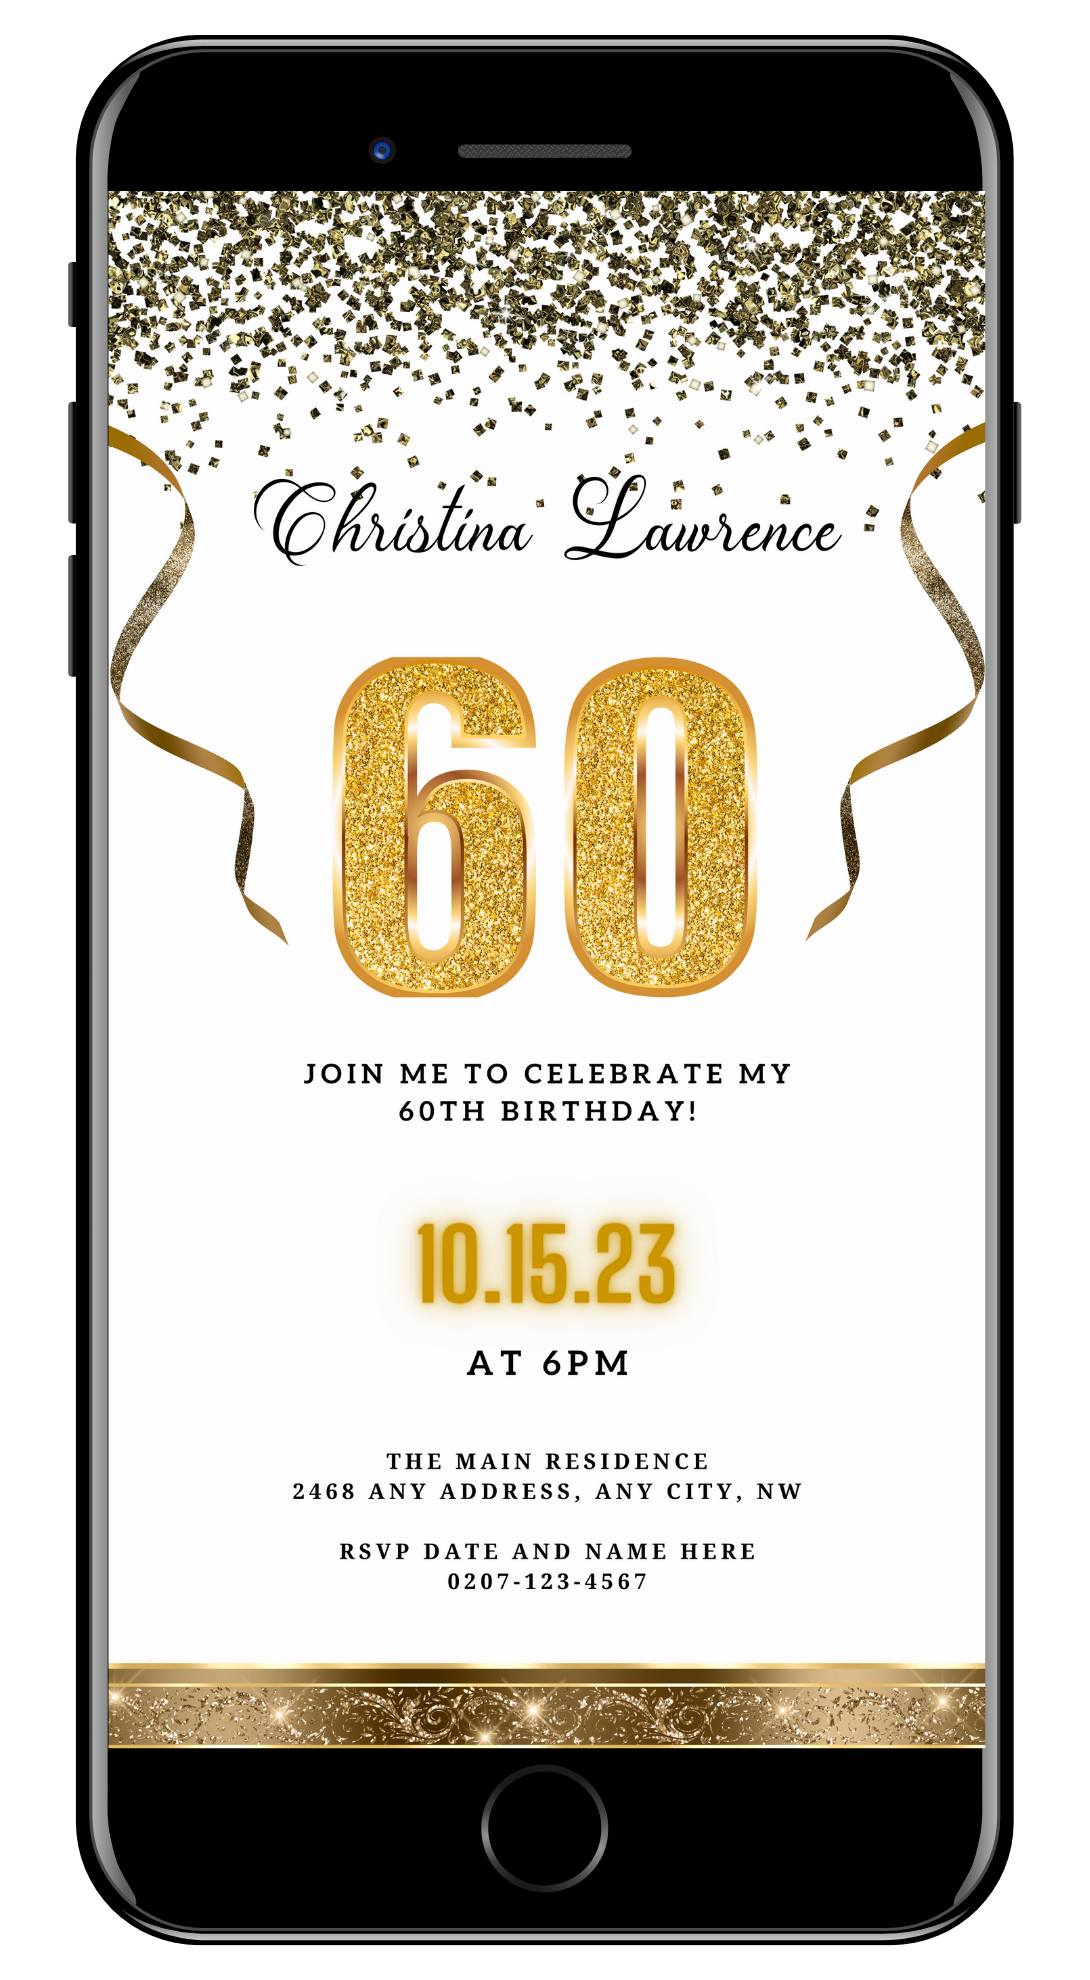 Customizable White Gold Confetti 60th Birthday Evite displayed on a smartphone screen with gold text and decorative ribbons.